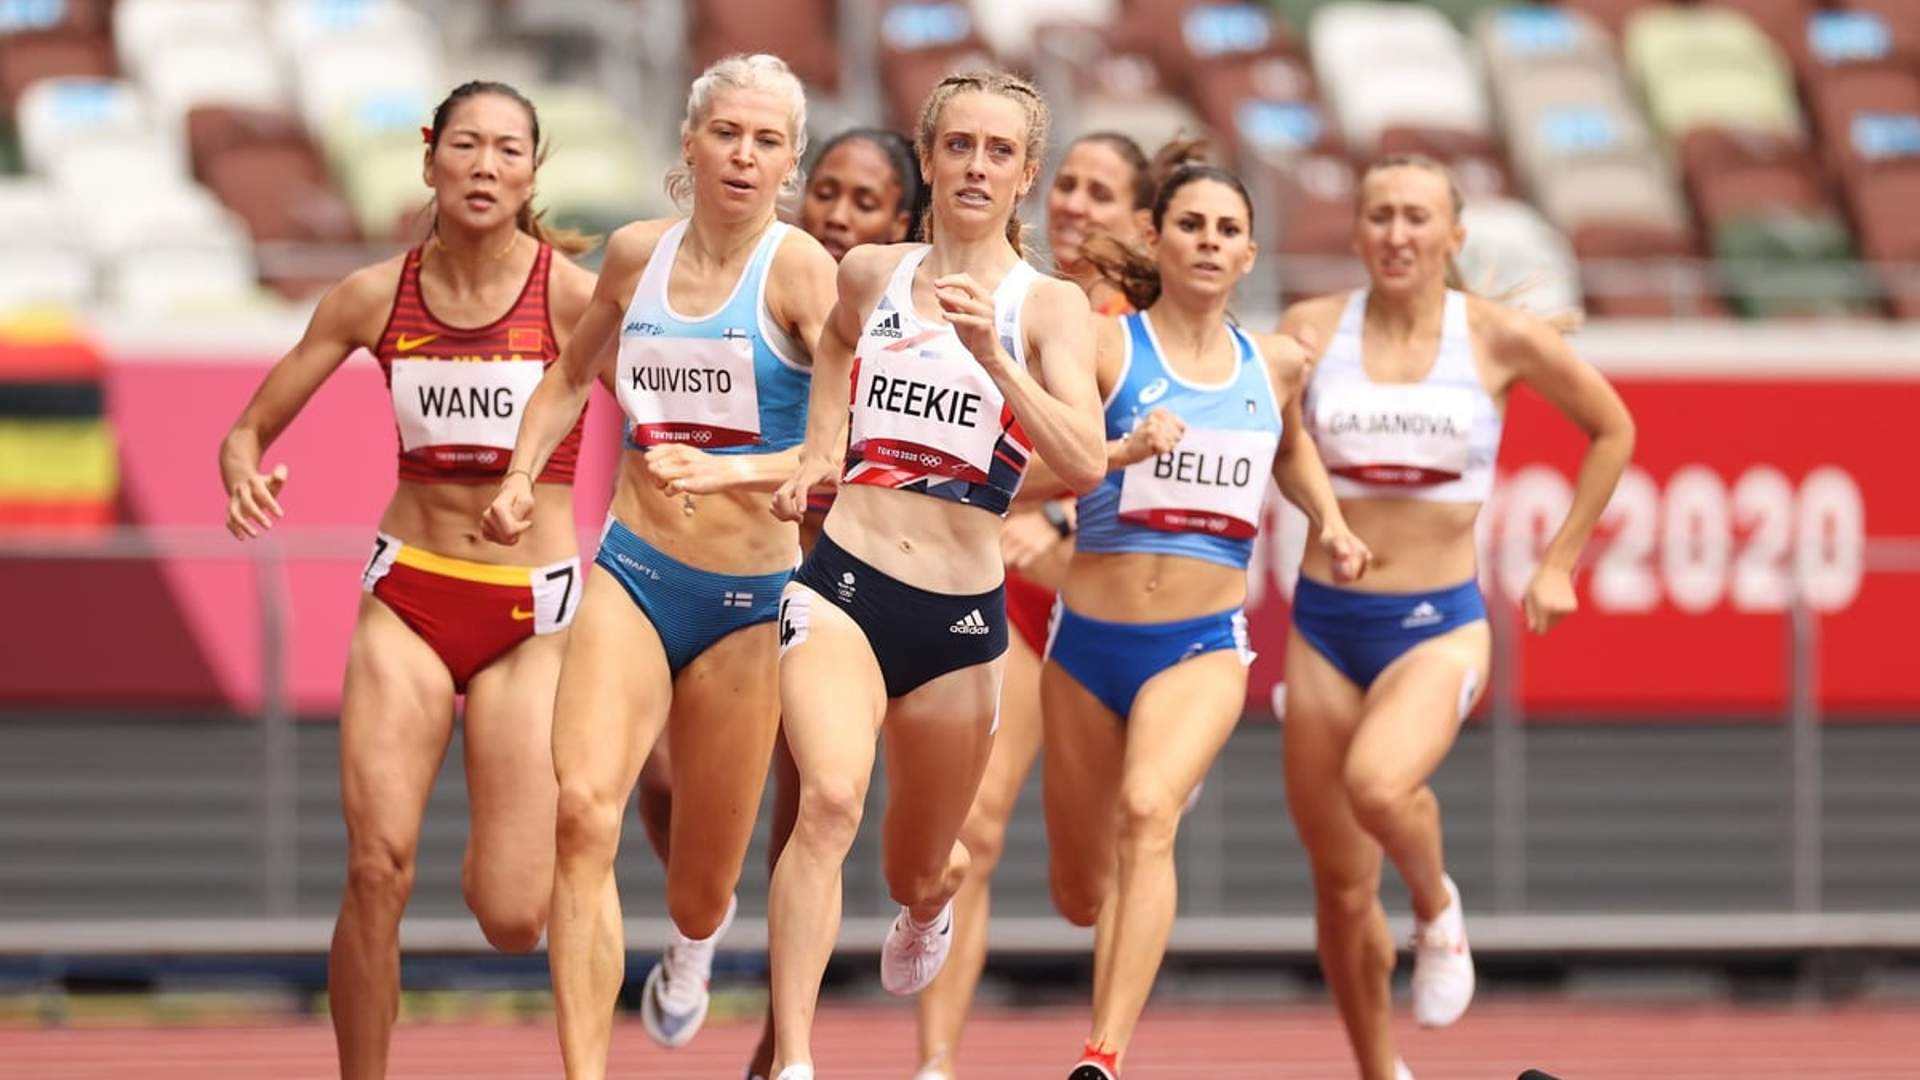 Jemma Reekie in action during Tokyo Olympics 2020 (Image Credits - World Athletics)